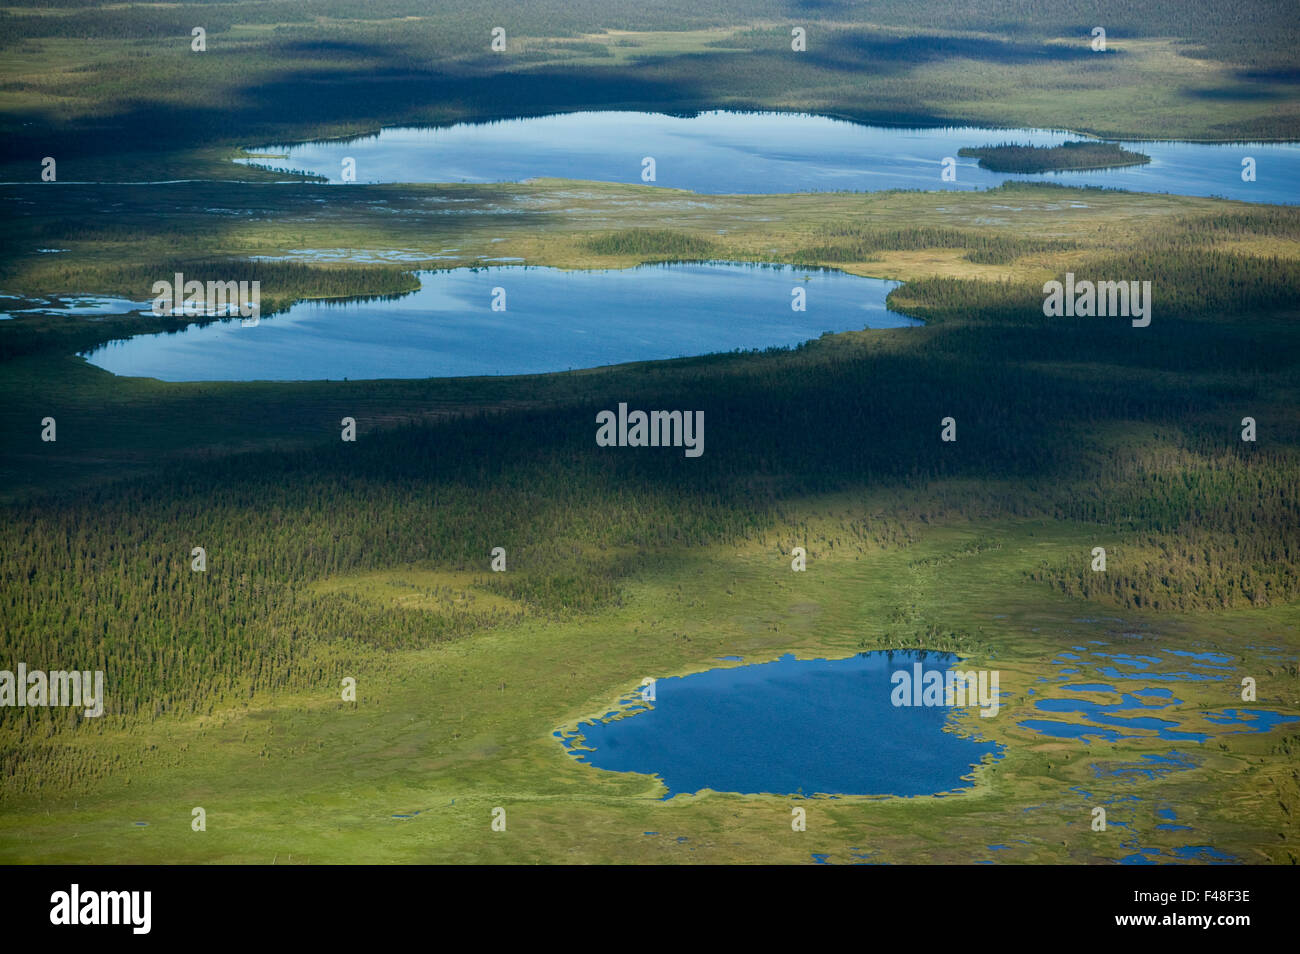 View over lakes in a forest landscape, Sweden. Stock Photo